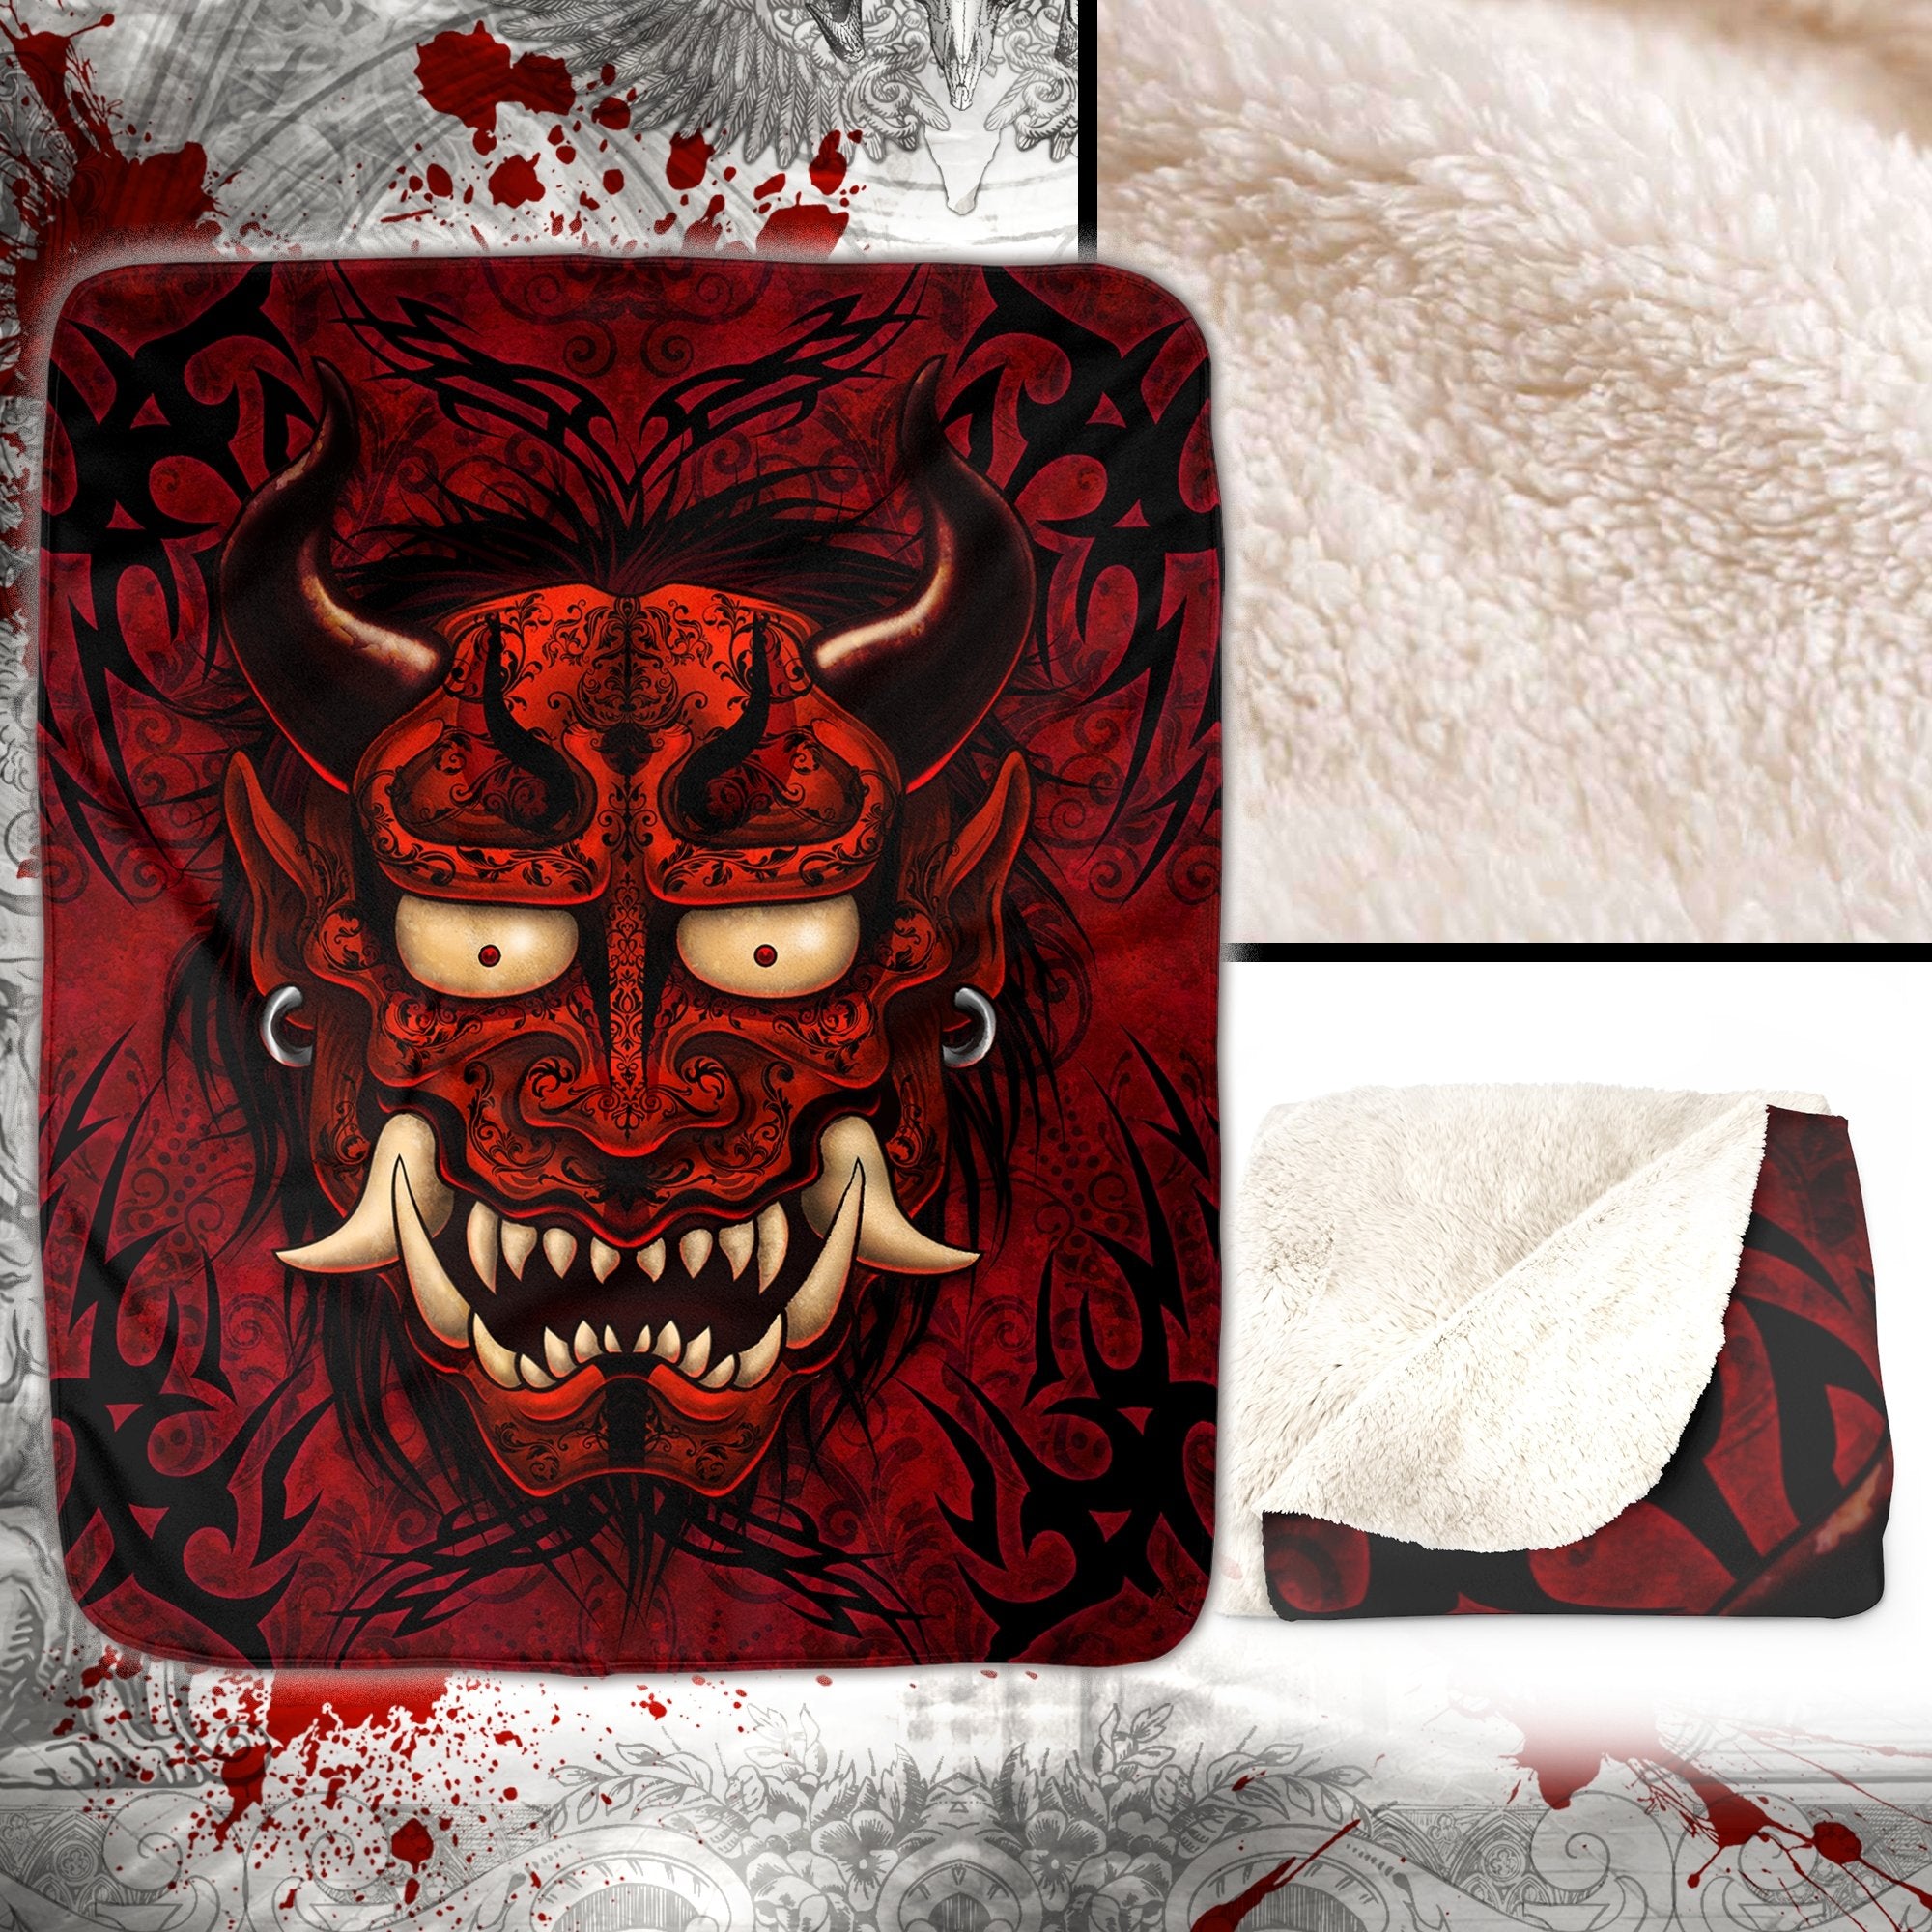 Oni Throw Fleece Blanket, Japanese Demon, Eclectic Home Decor, Tattoo style, Alternative Art Gift - Red and Black - Abysm Internal